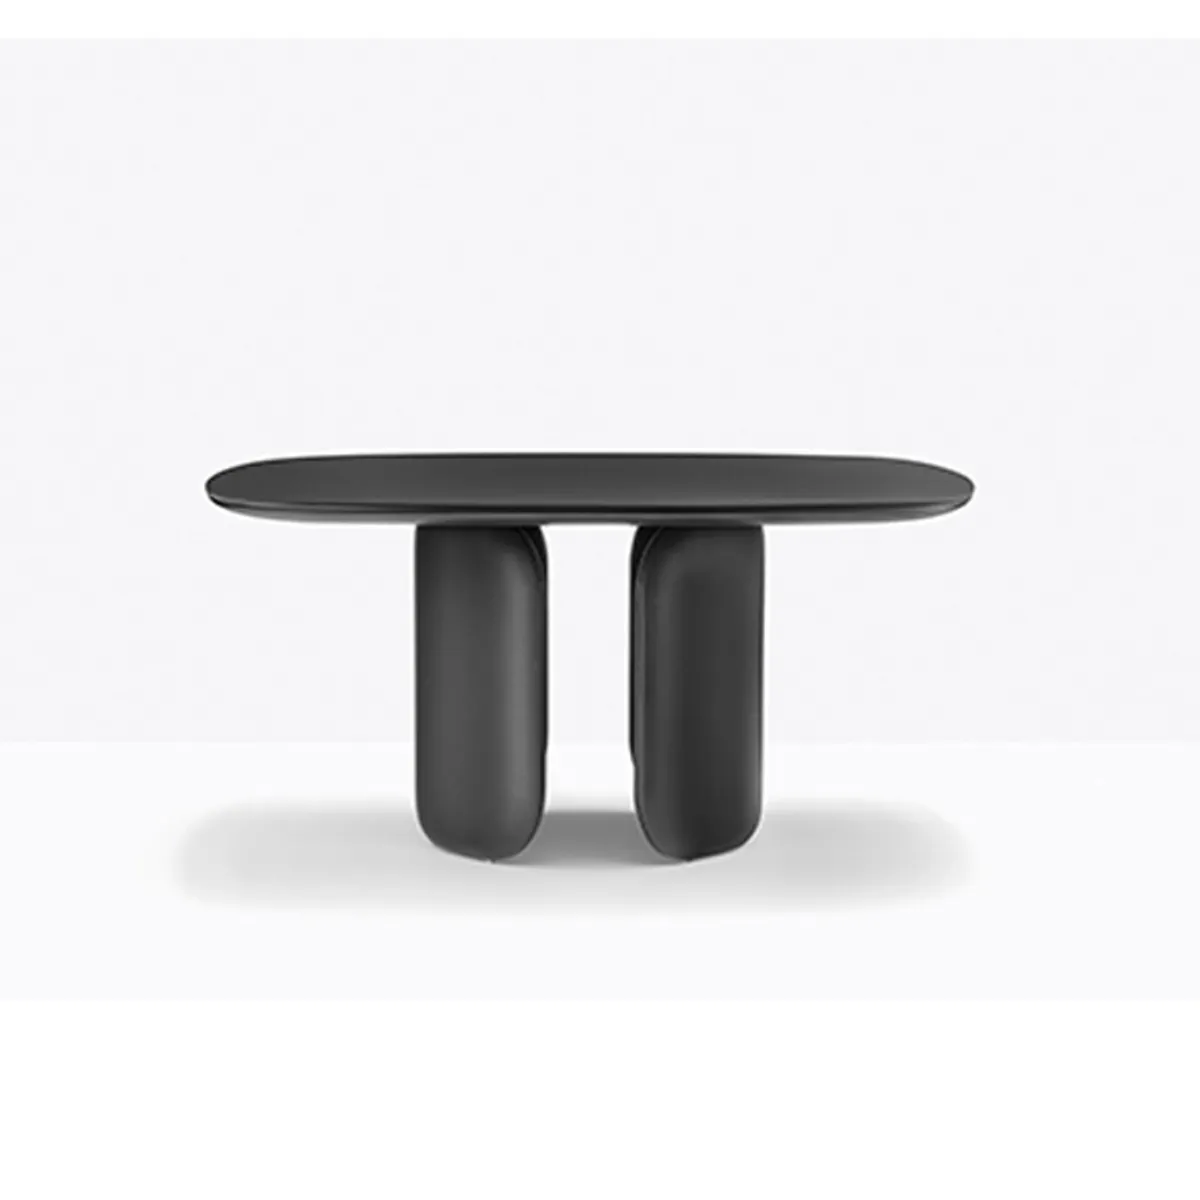 Elinor small table Inside Out Contracts5